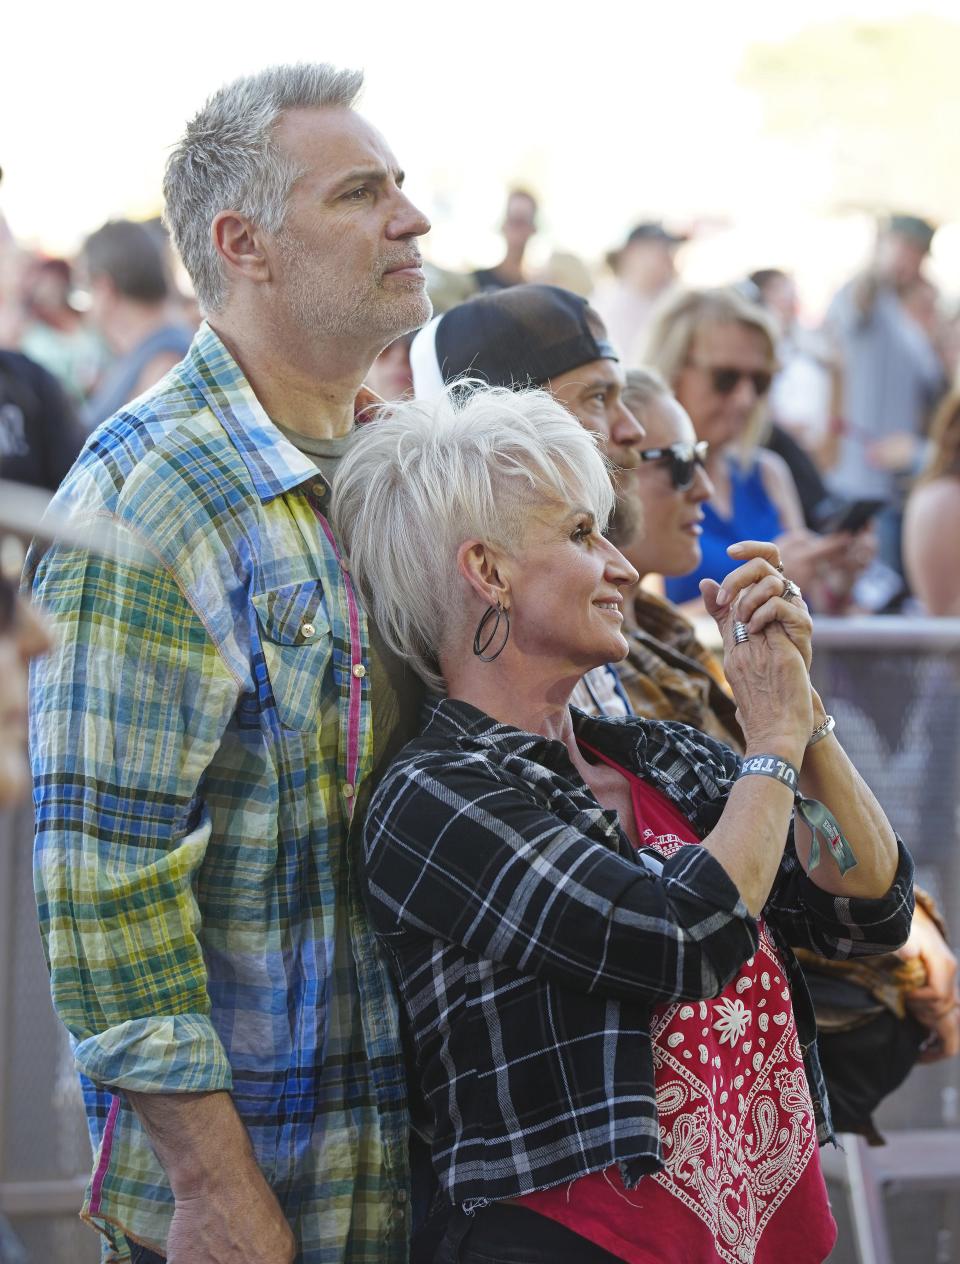 Former Cardinals quarterback Kurt Warner and his wife Brenda Warner listen to Nate Smith at Country Thunder Music Festival near Florence on April 14, 2023.